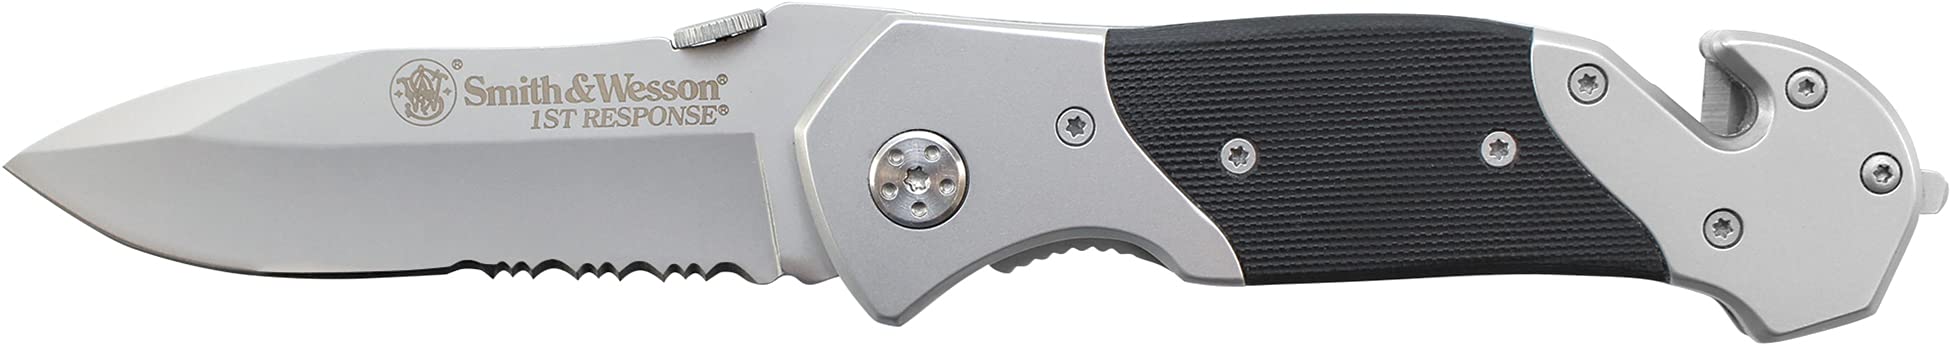 Smith & Wesson, Messer First Response Folder